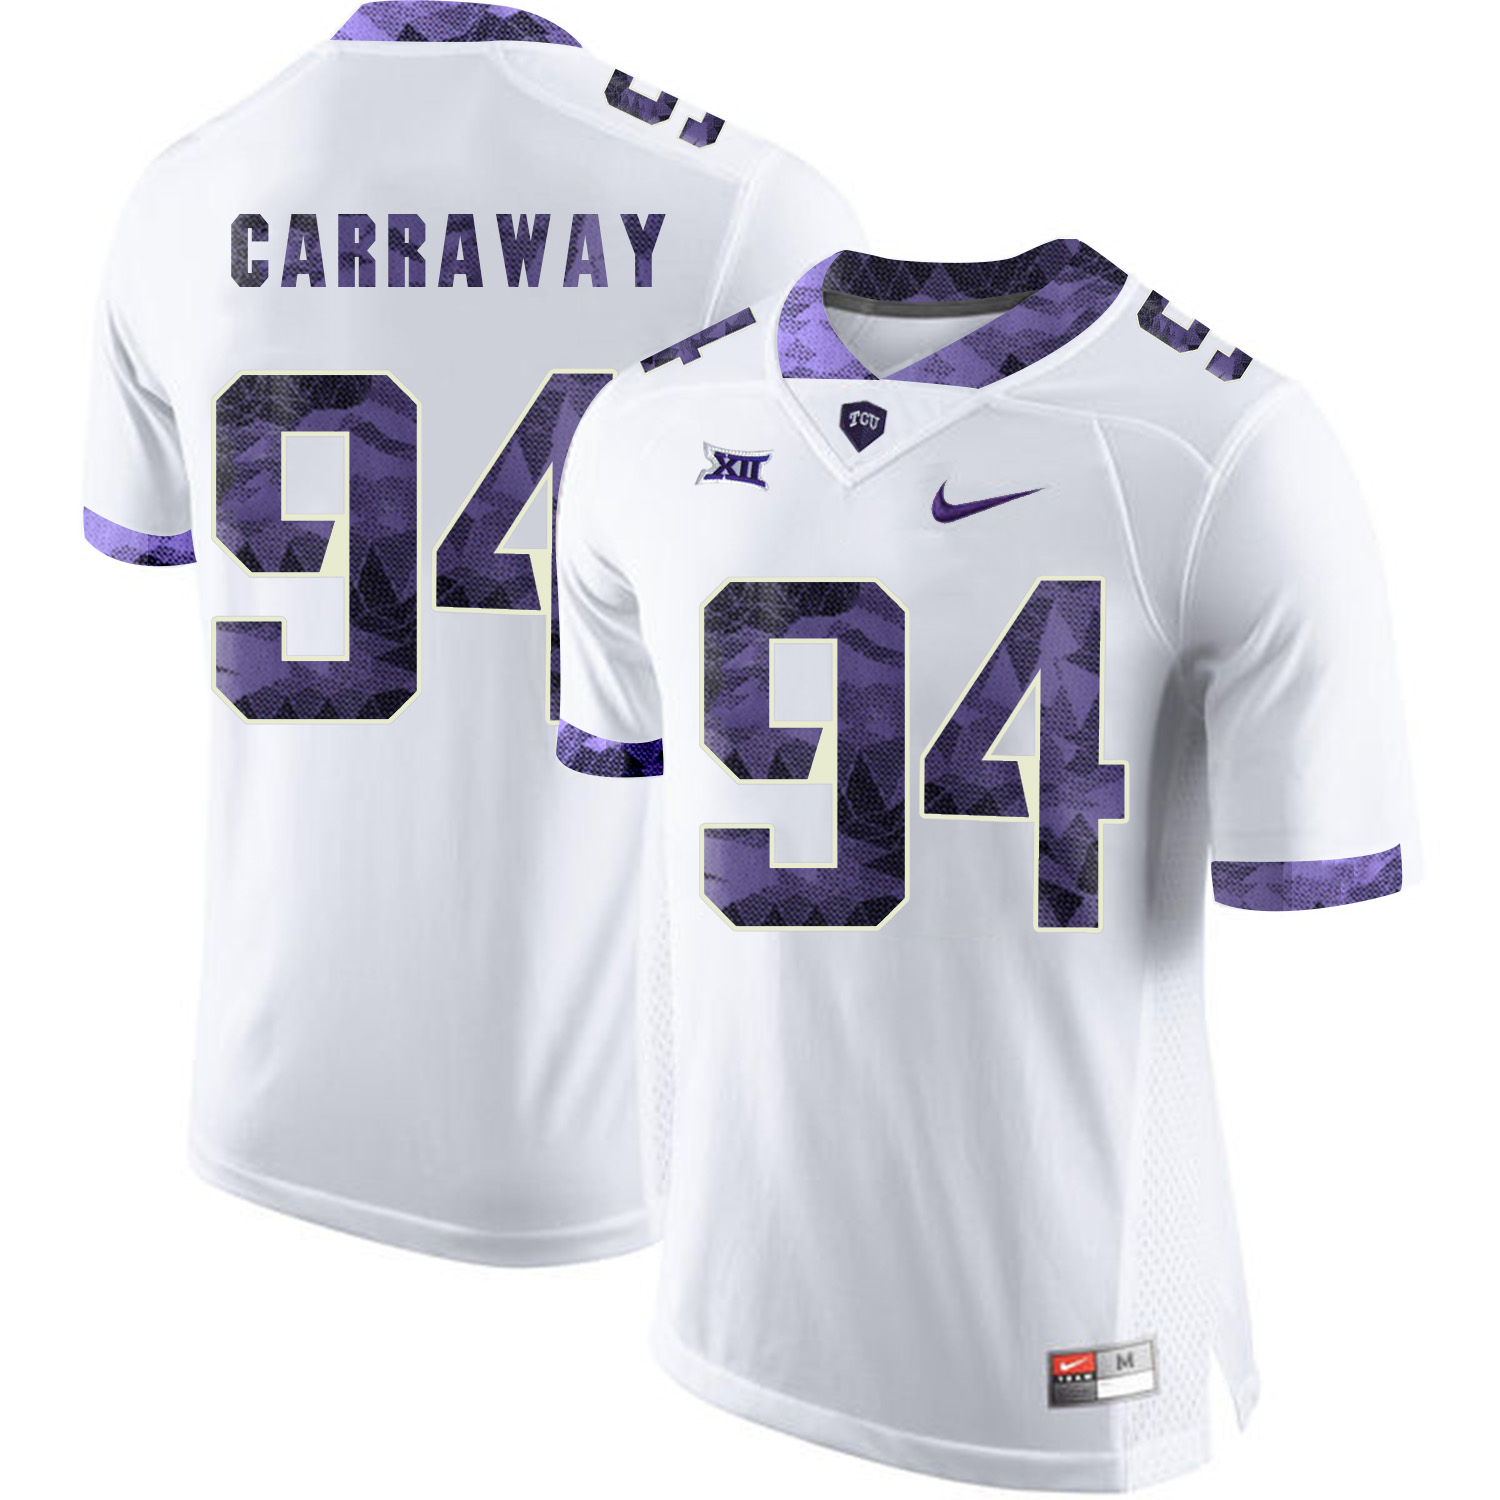 TCU Horned Frogs 94 Josh Carraway White Print College Football Limited Jersey